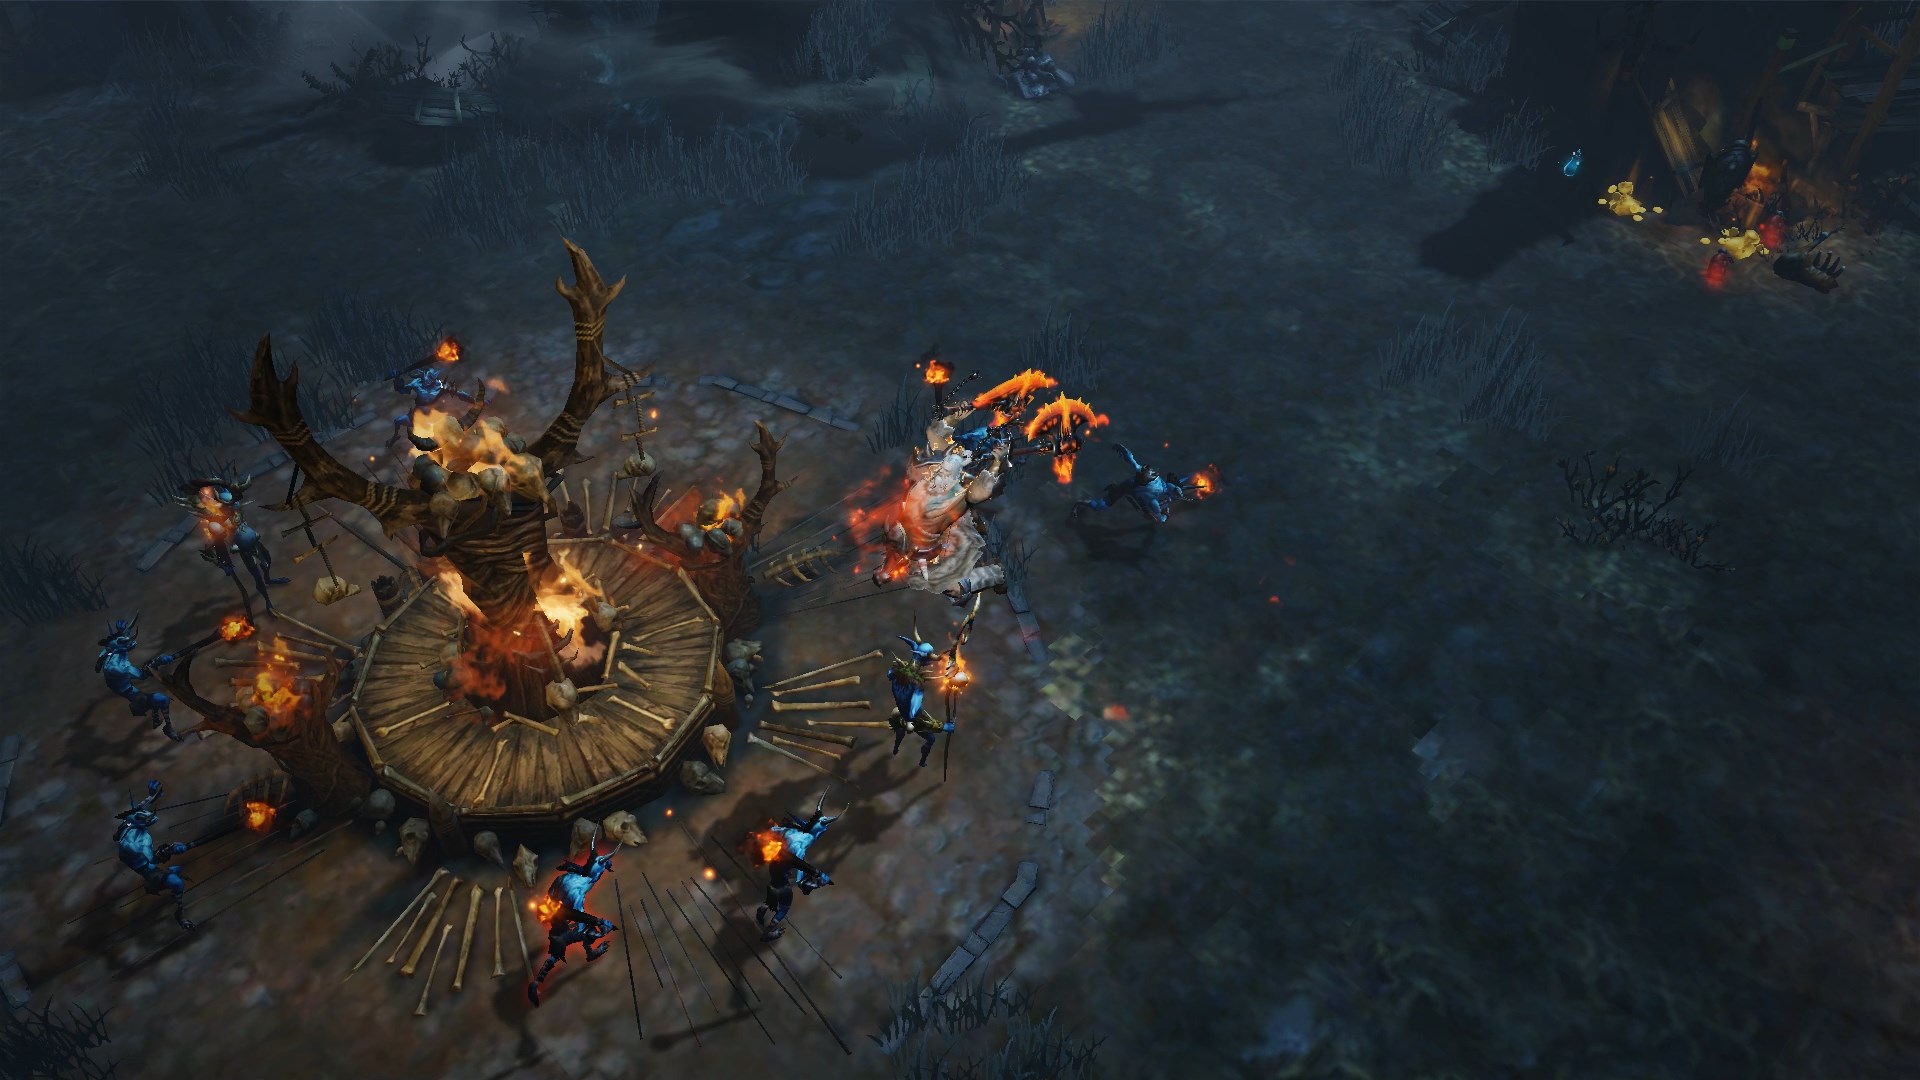 Blizzard Announces Diablo Immortal Coming To iOS, Android